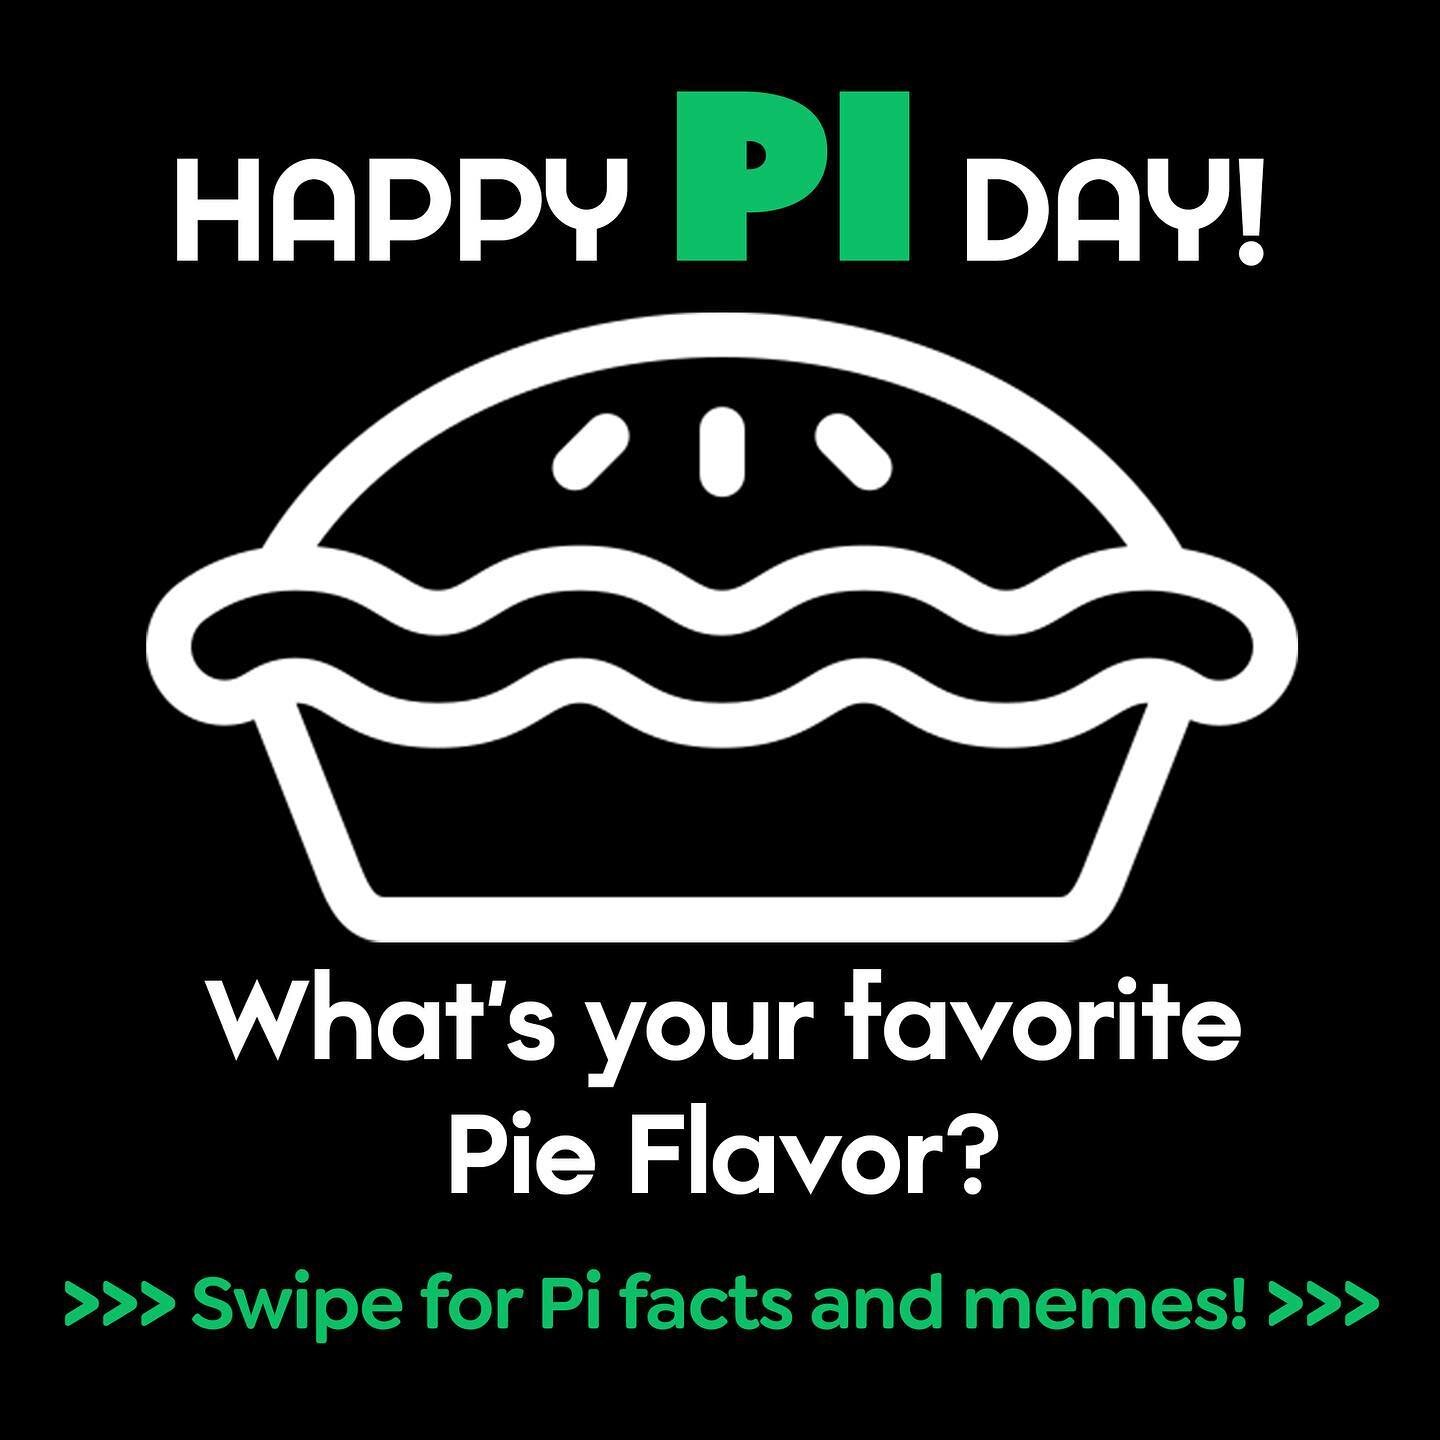 Happy PI day folks! Comment below and let us know what your favorite Pie flavors are 🤤
Join us in celebrating this nerdy holiday by receiving a slice off our service rates. All Tier 3 services only $99 plus this week(regularly $139 plus tax)! Just m